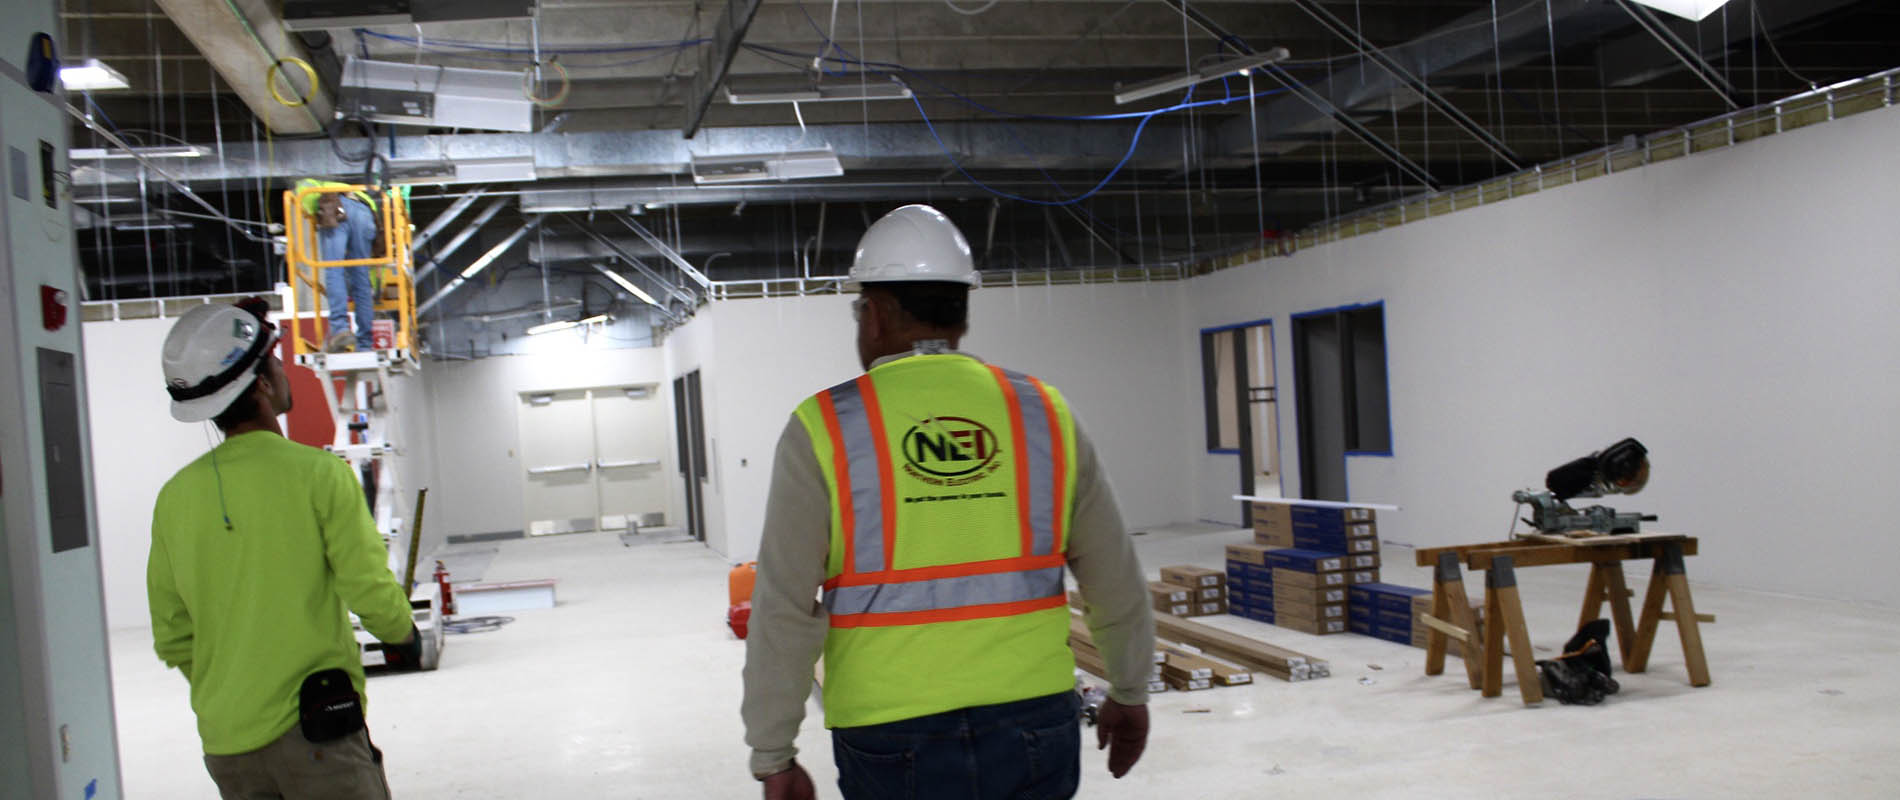 NEI COO Jim Conard walking through job site with another electrician